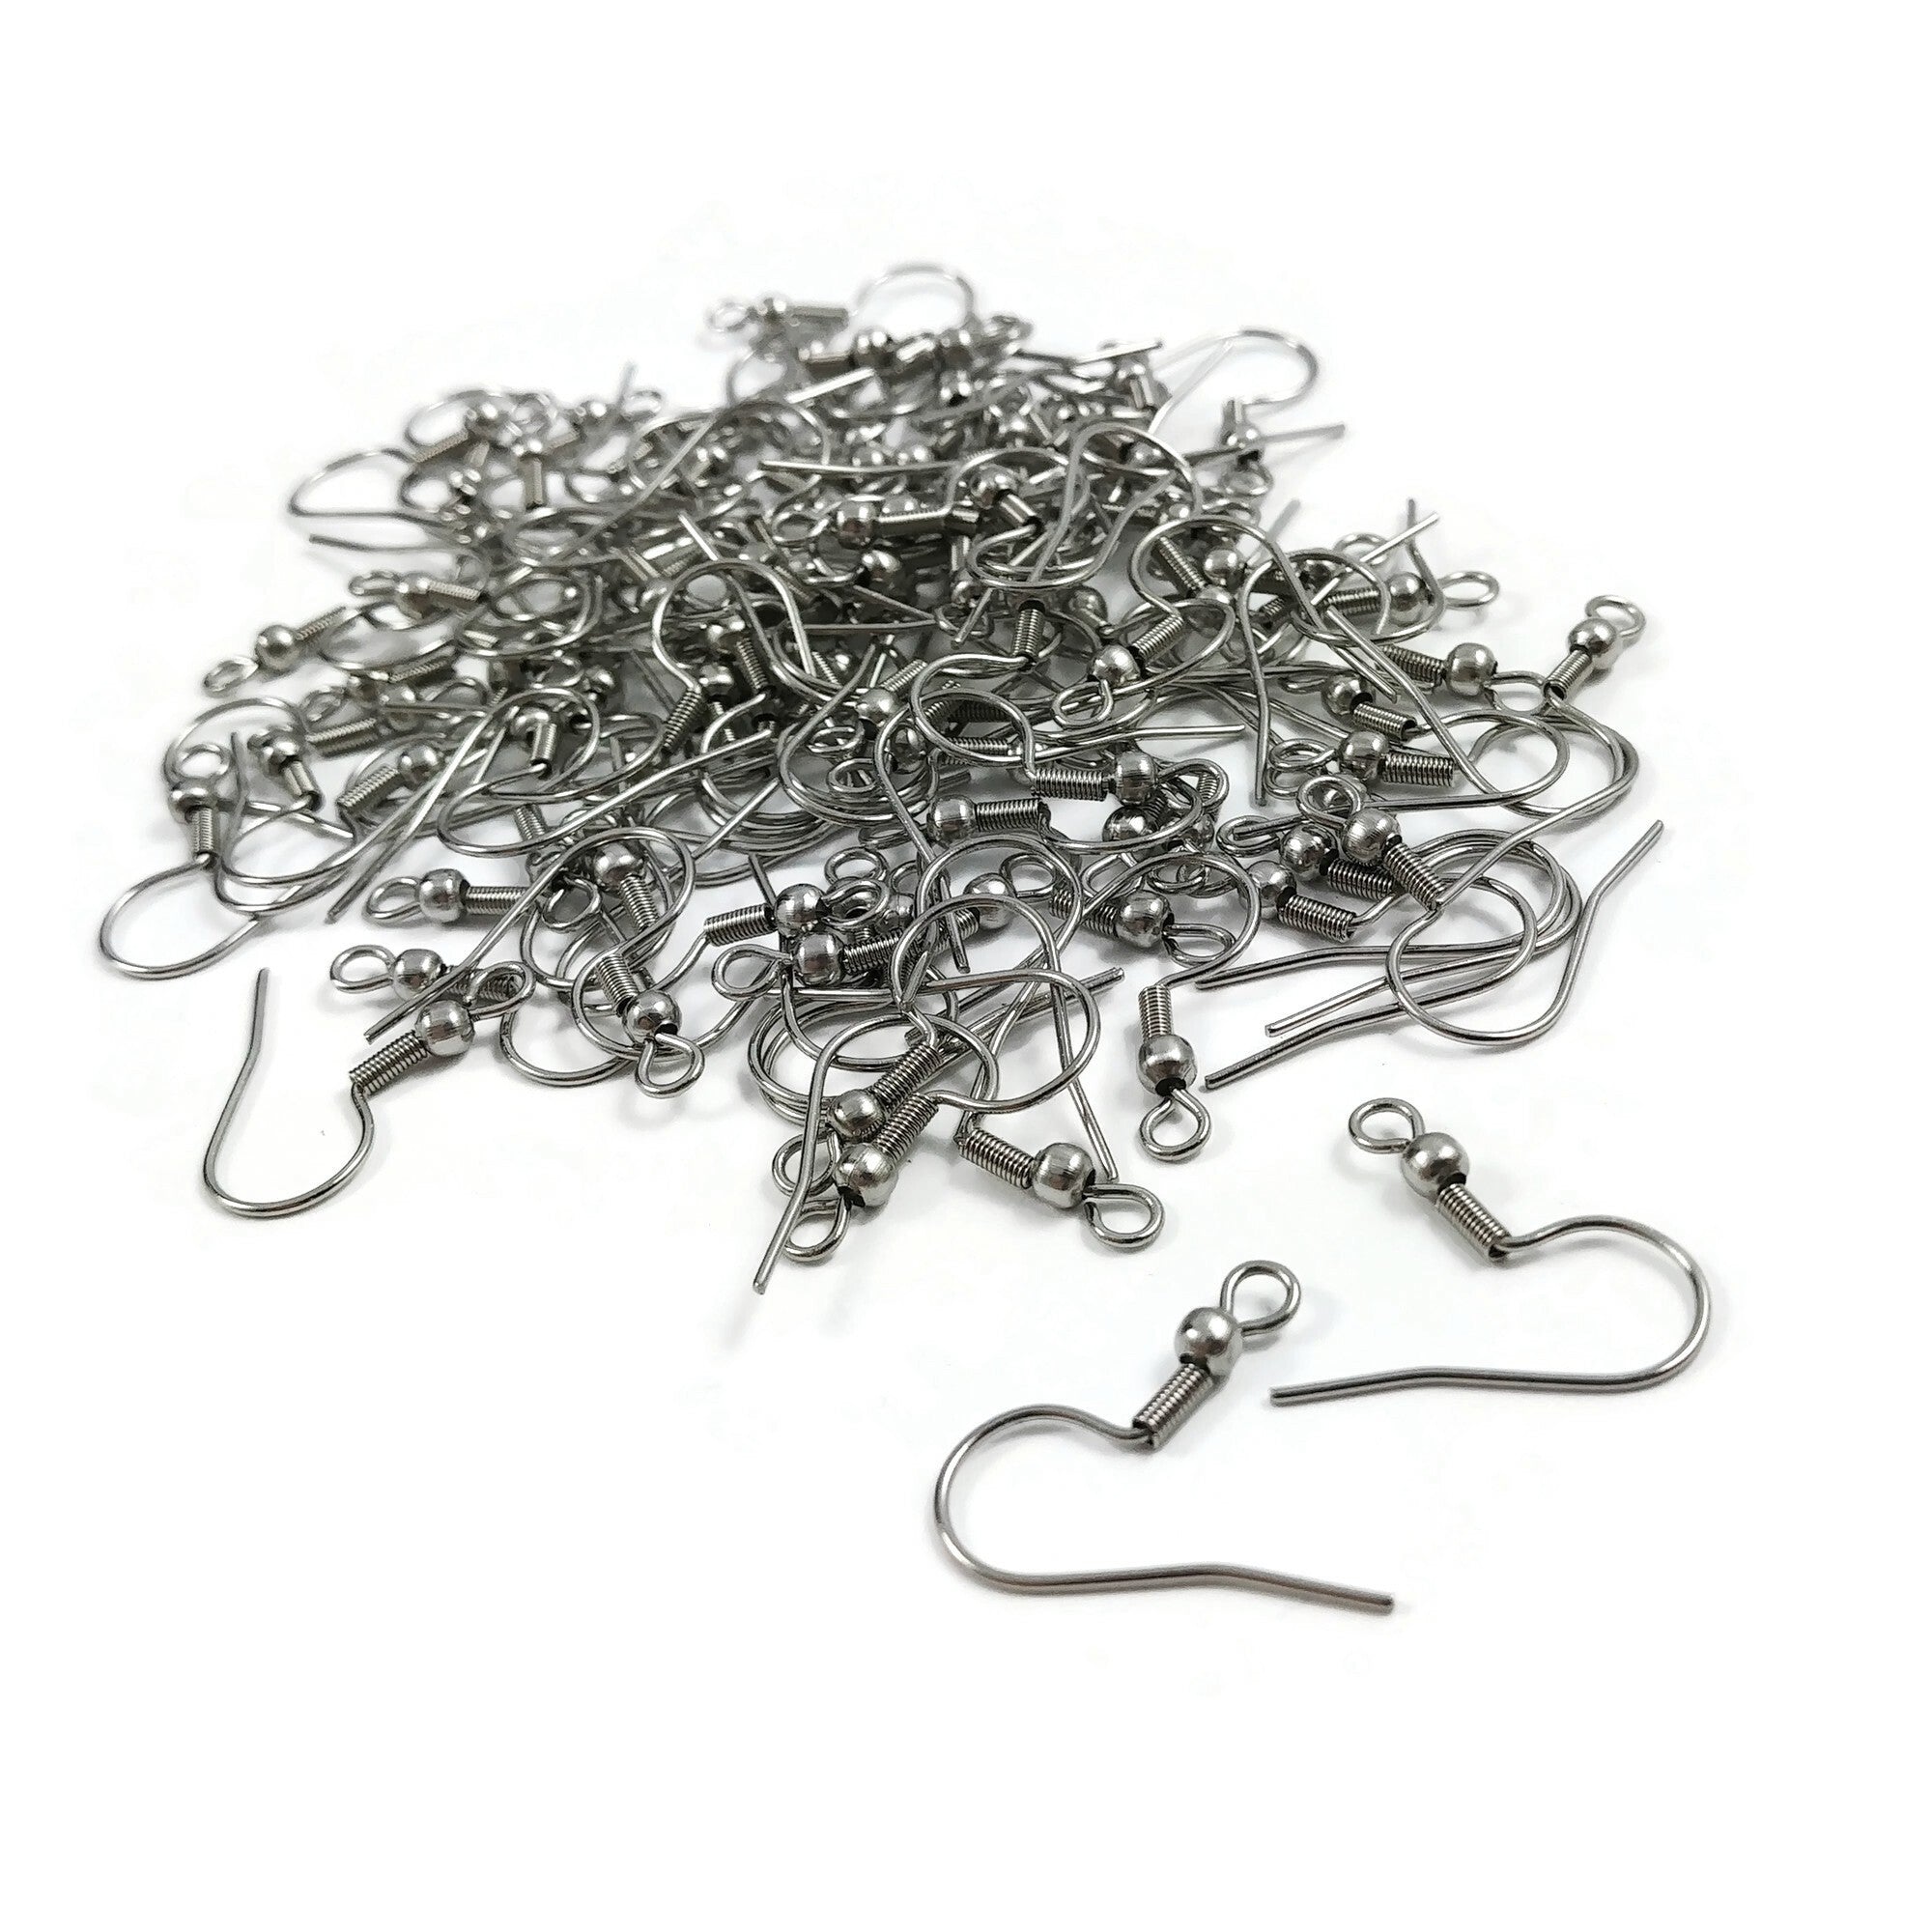 GUFJUCH Stainless Steel Earring Hooks French Ear Wire, 600pcs Earring  Making Findings Parts Jewels DIY Supplies Kits, with Silicone Earr